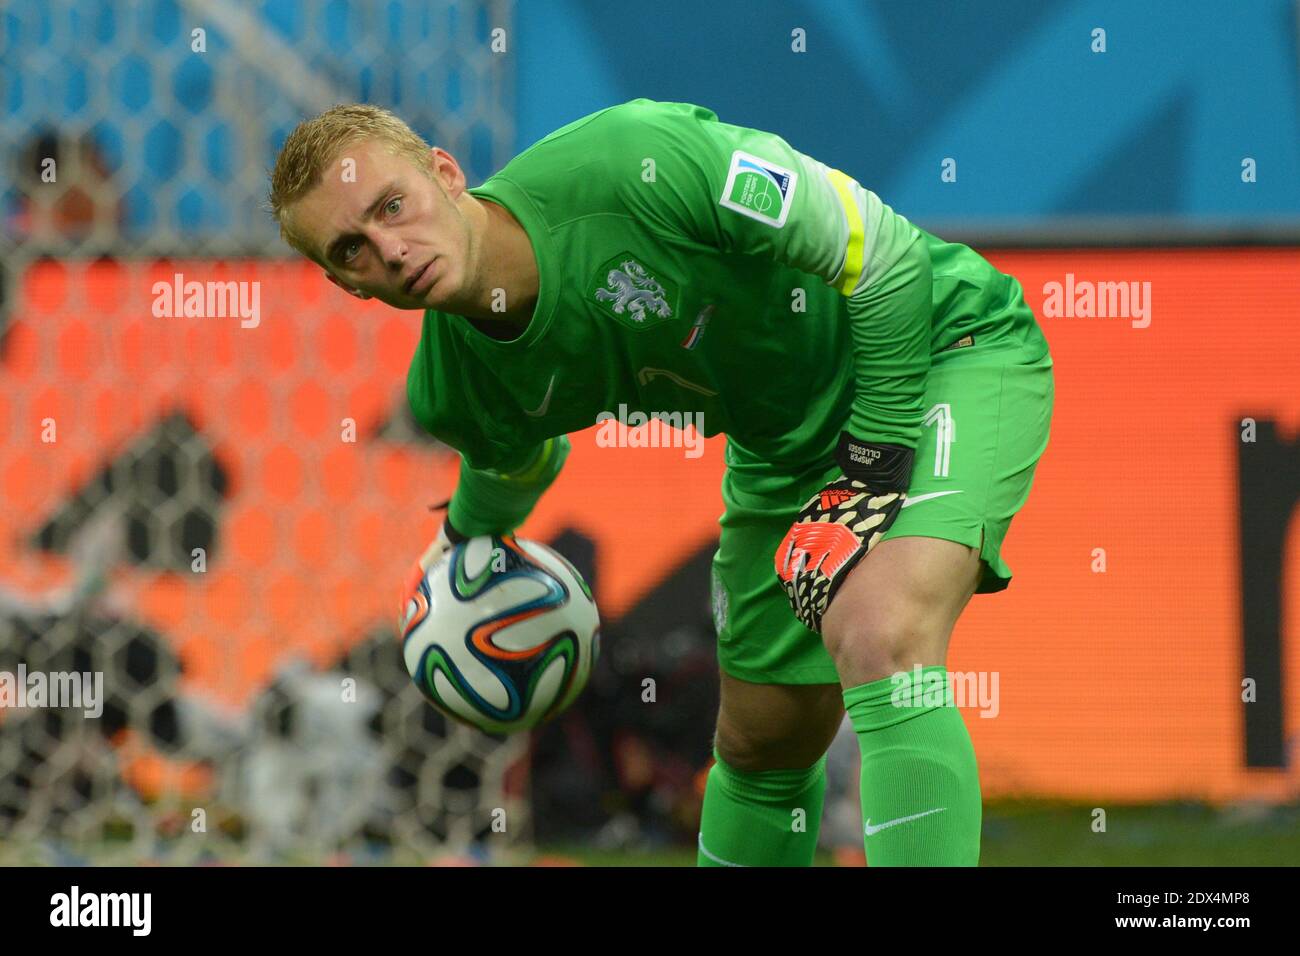 Netherlands's Jasper Cillessen during Soccer World Cup Semi Final match Netherlands v Argentina at Itaquera Stadium, Sao Paulo, Brazil on July 9, 2014. Argentina won on the penalty shoot-out 5-3 after a 0-0 score. Photo by Henri Szwarc/ABACAPRESS.COM Stock Photo